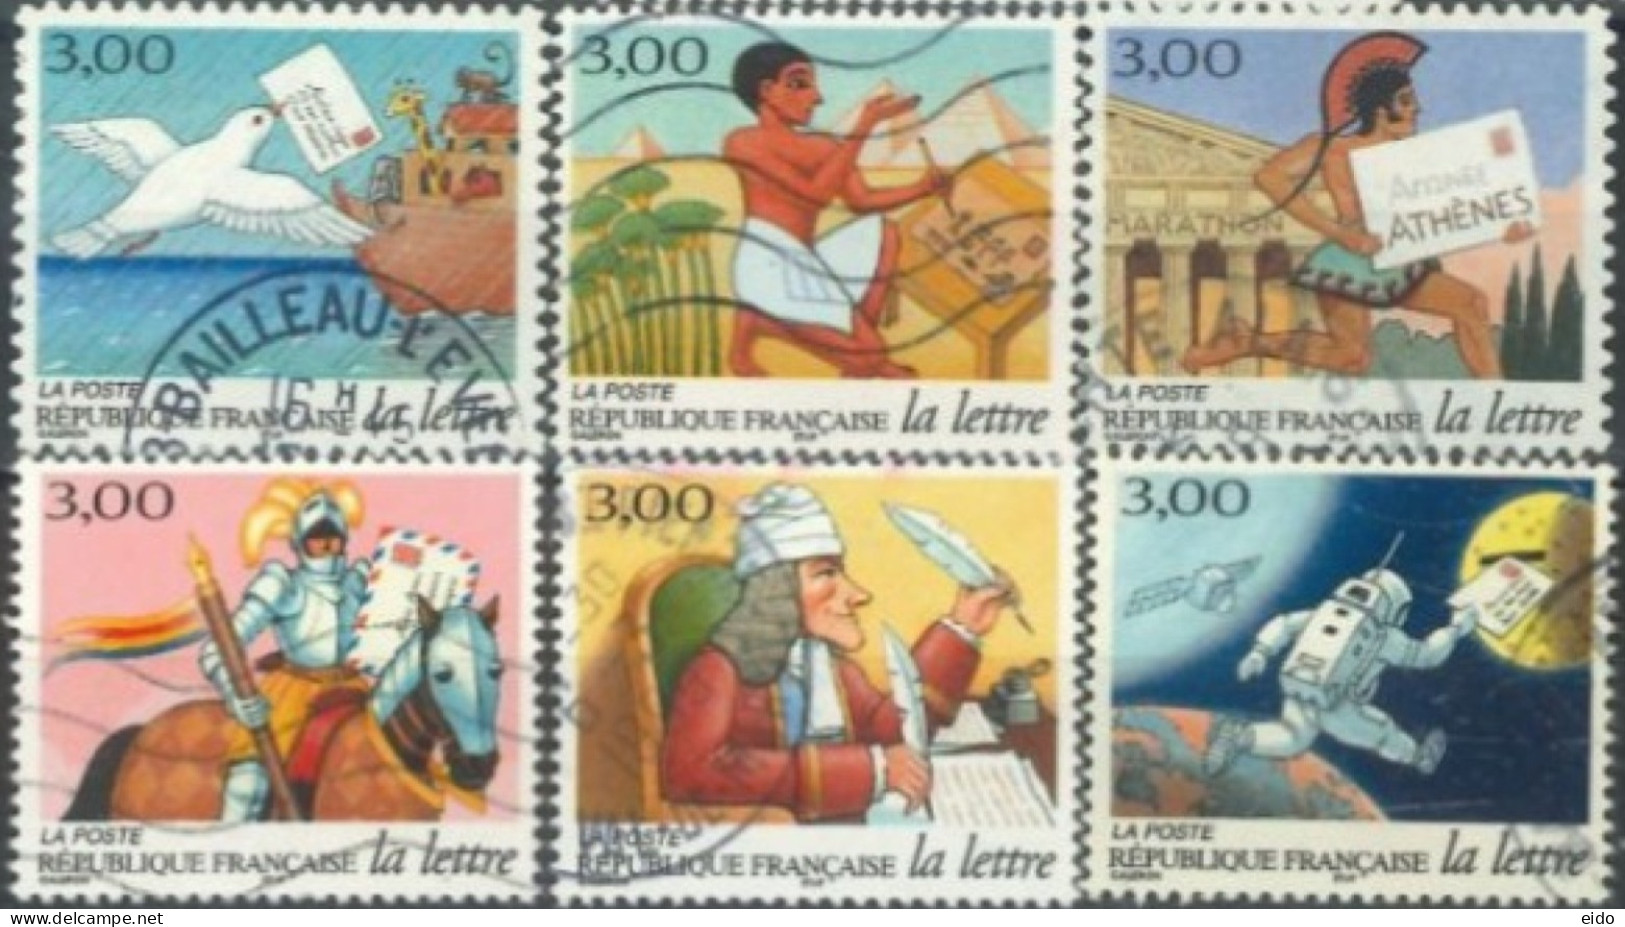 FRANCE -1998 - POST DAY AHESSIVE STAMPS COMPLETE SET OF 6,  # 3150/55, USED - Gebruikt